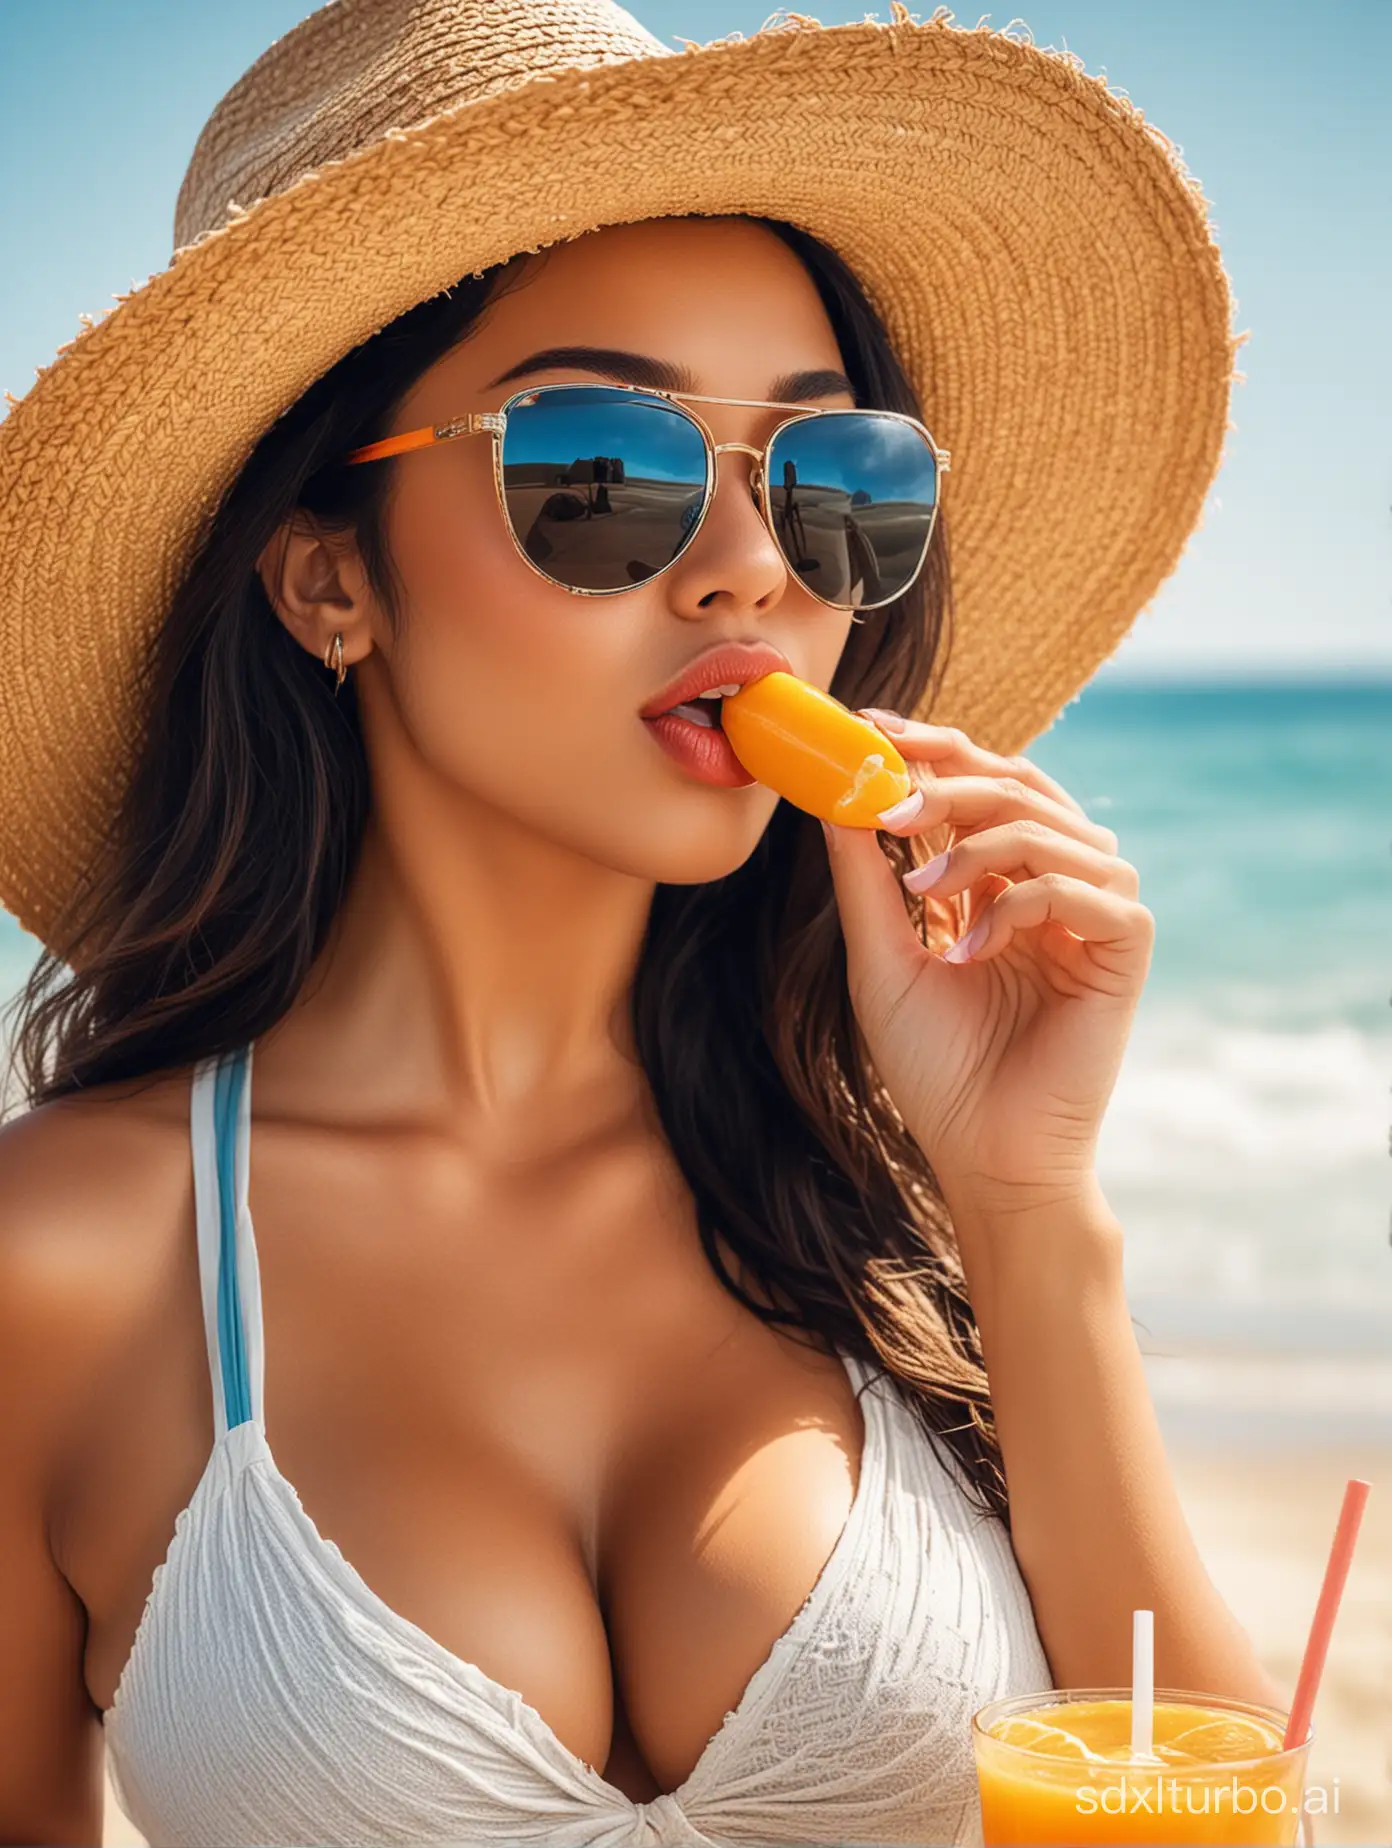 a busty hyper realistic latina with big boob on beach drinking juice with straw touching her lips and wearing sunglass and hat